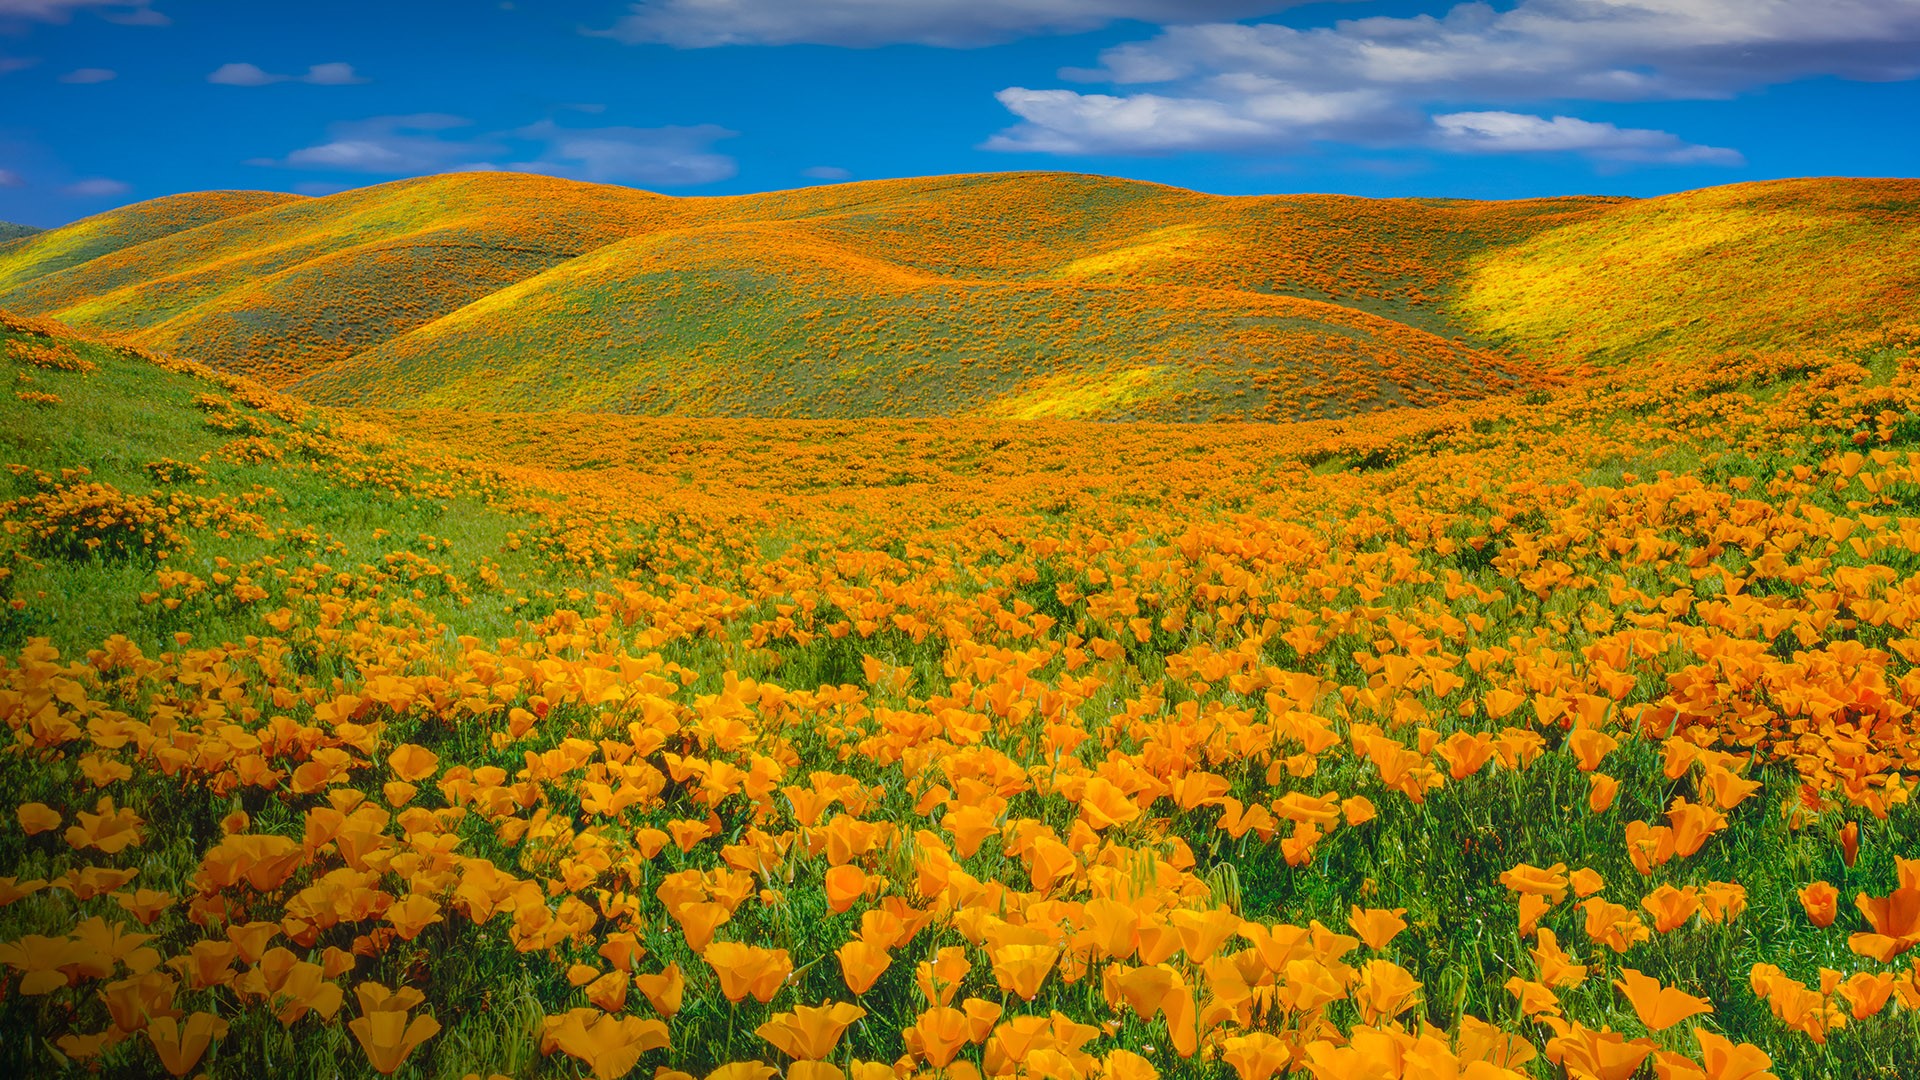 General 1920x1080 nature landscape sky clouds flowers hills plants yellow flowers spring California USA Antelope Valley